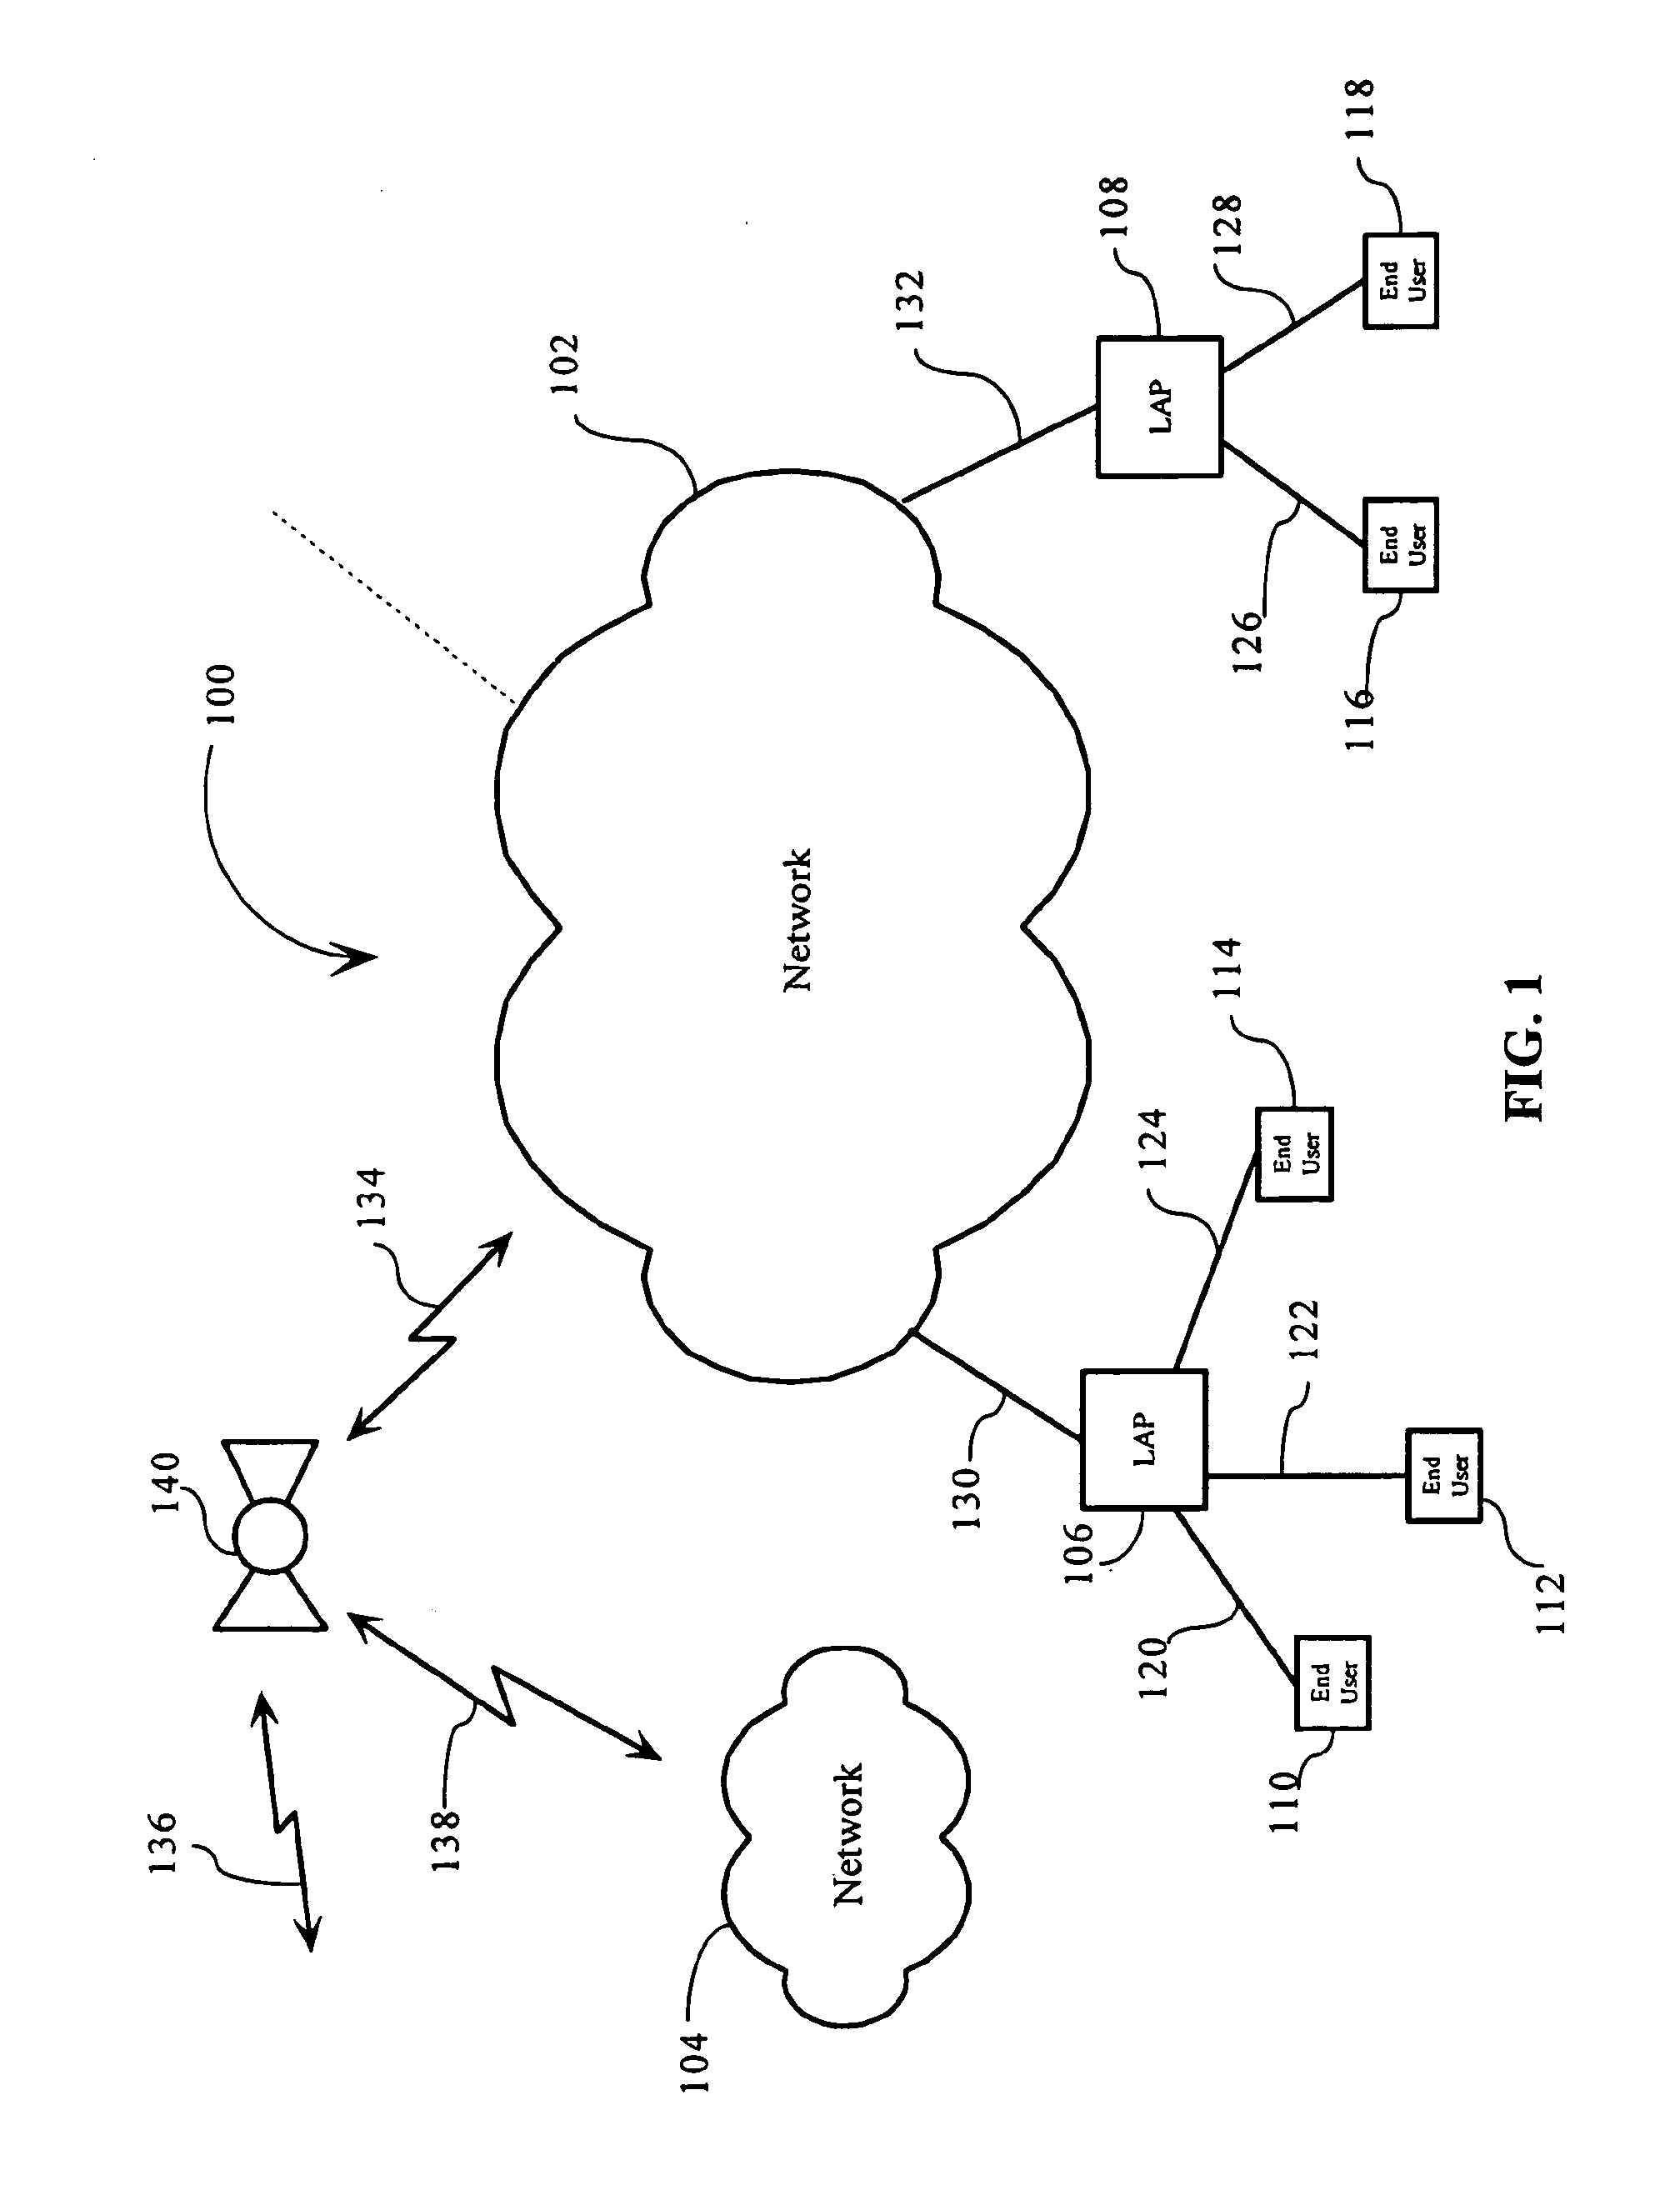 Pre-distortion of input signals to form constant envelope signal outputs